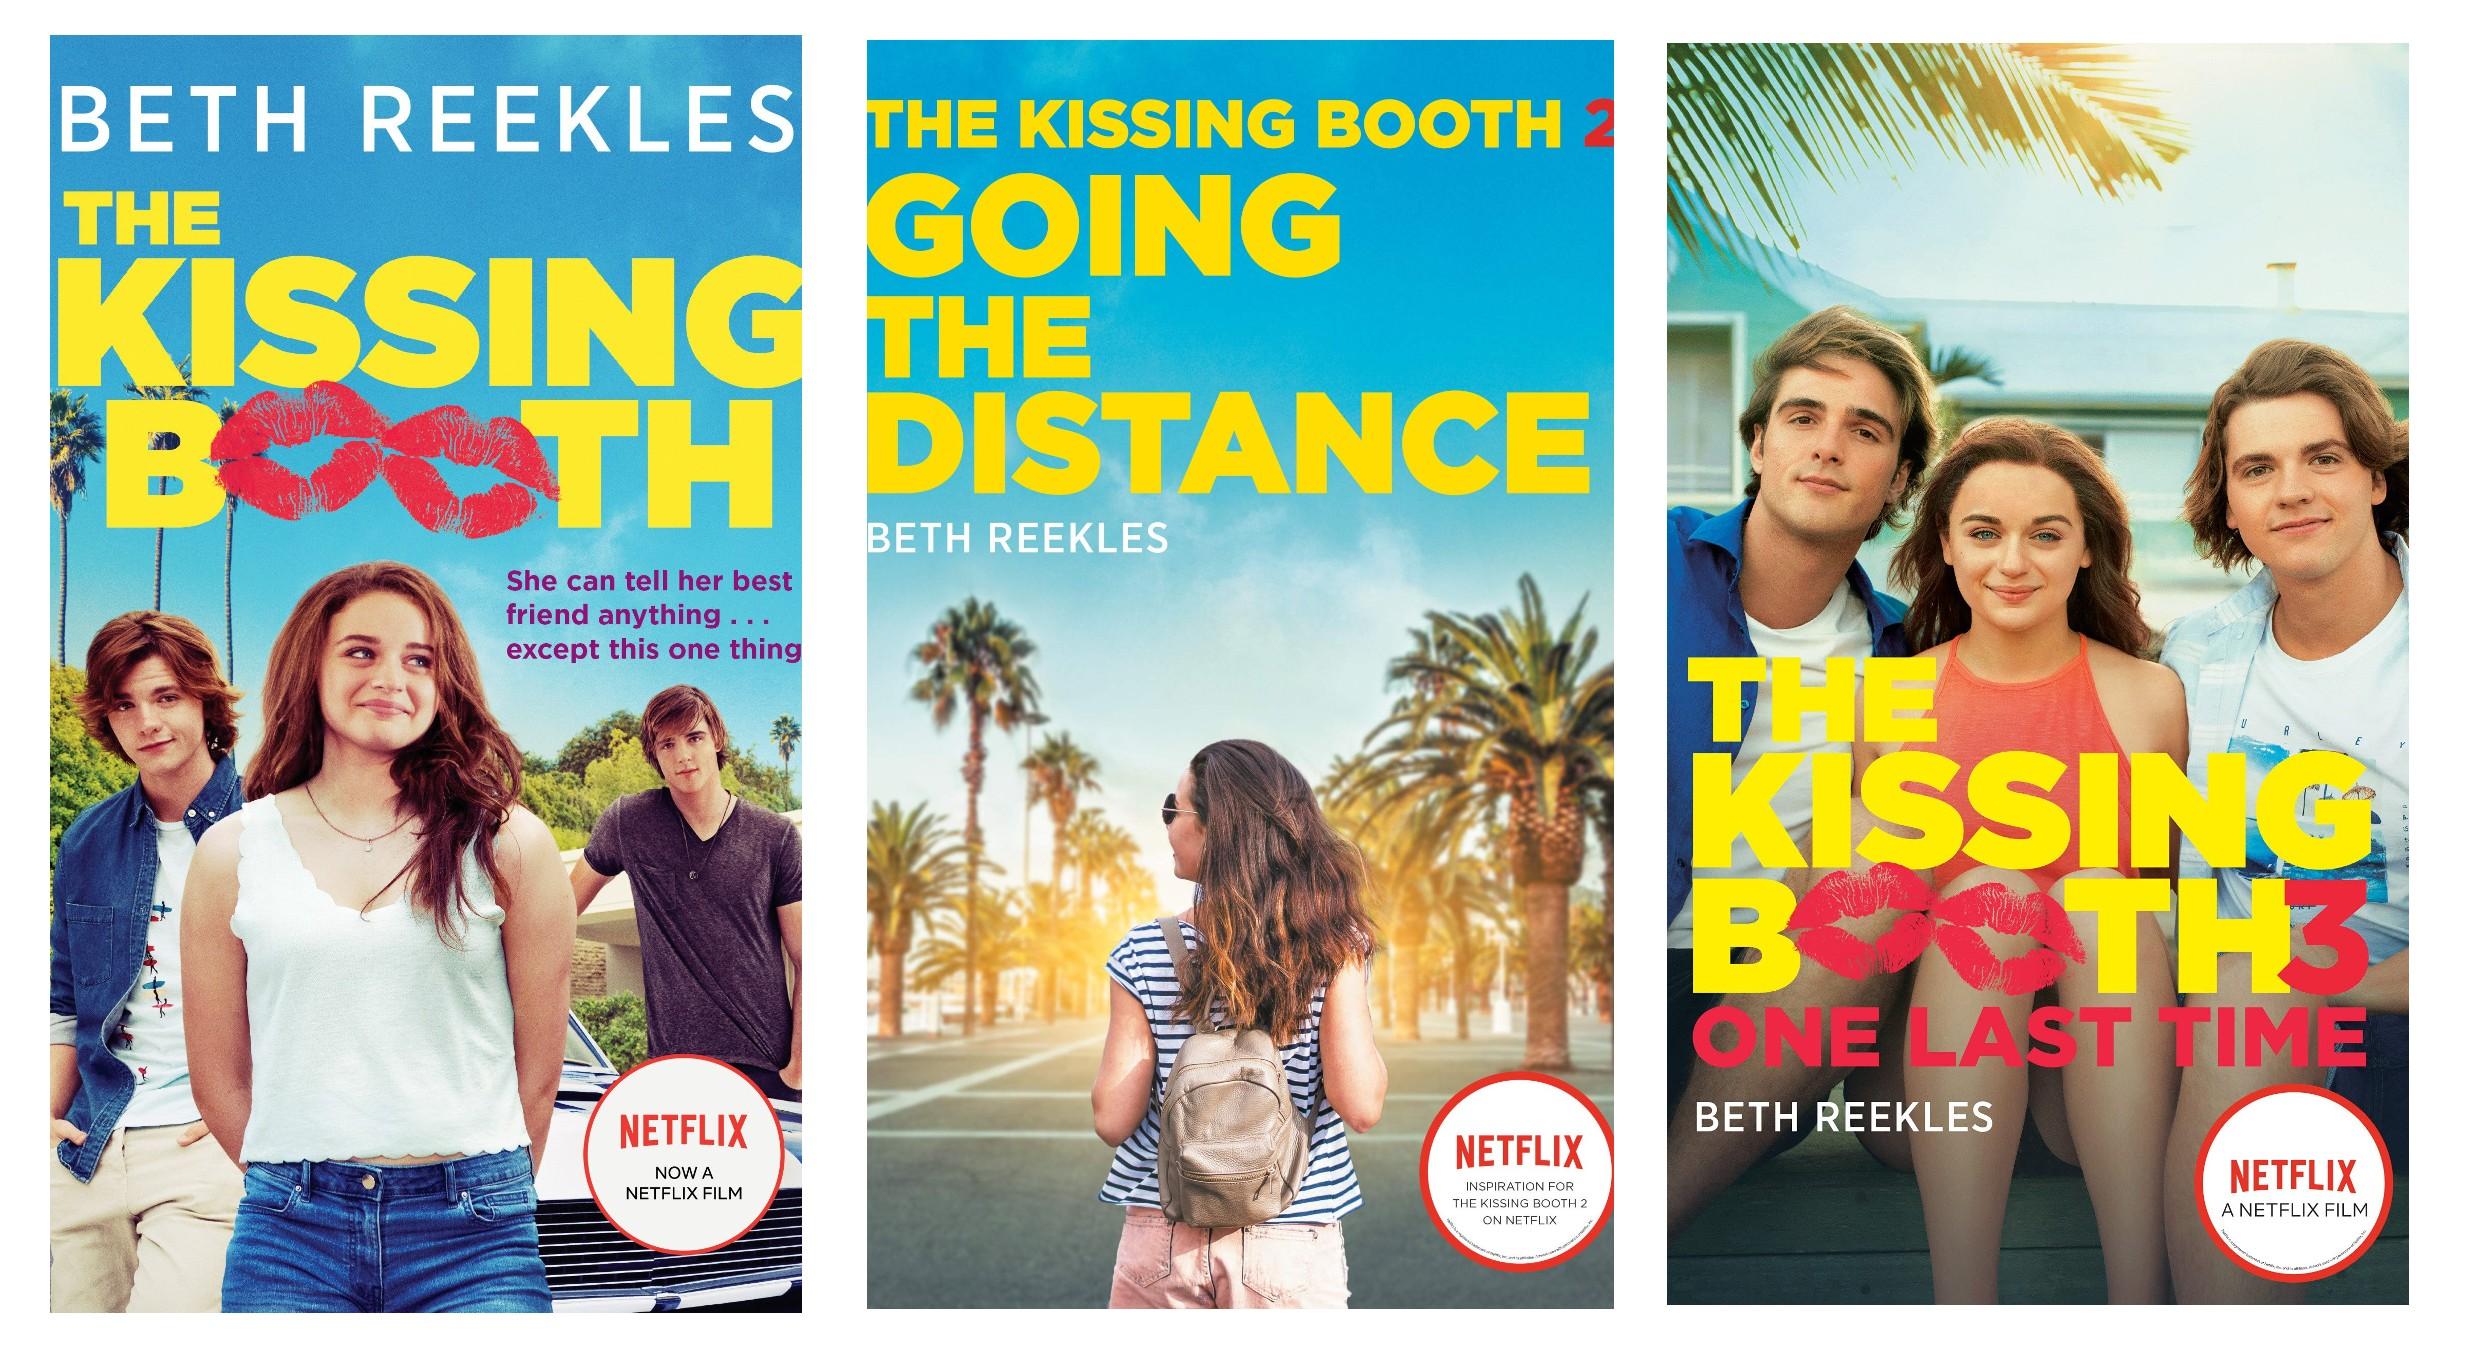 the kissing booth summary